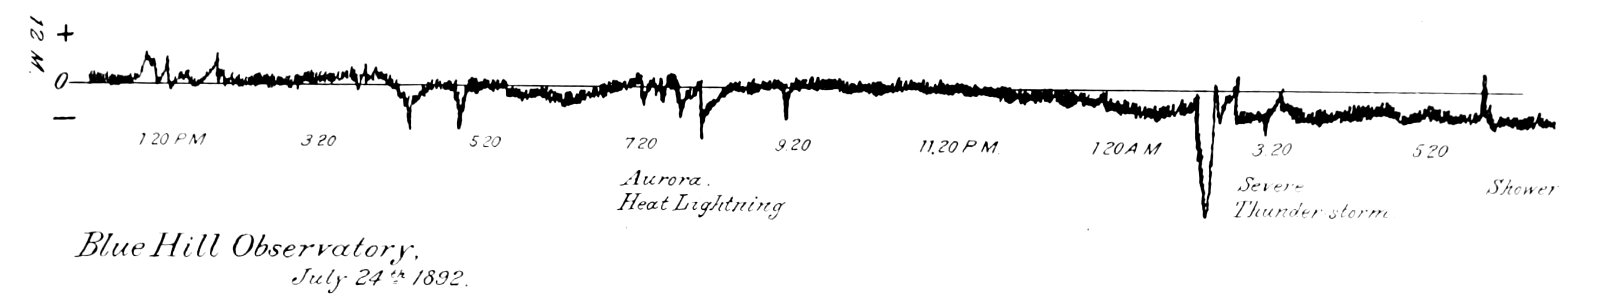 PSM V43 D476 Curve showing the electrical potential of the atmosphere photo